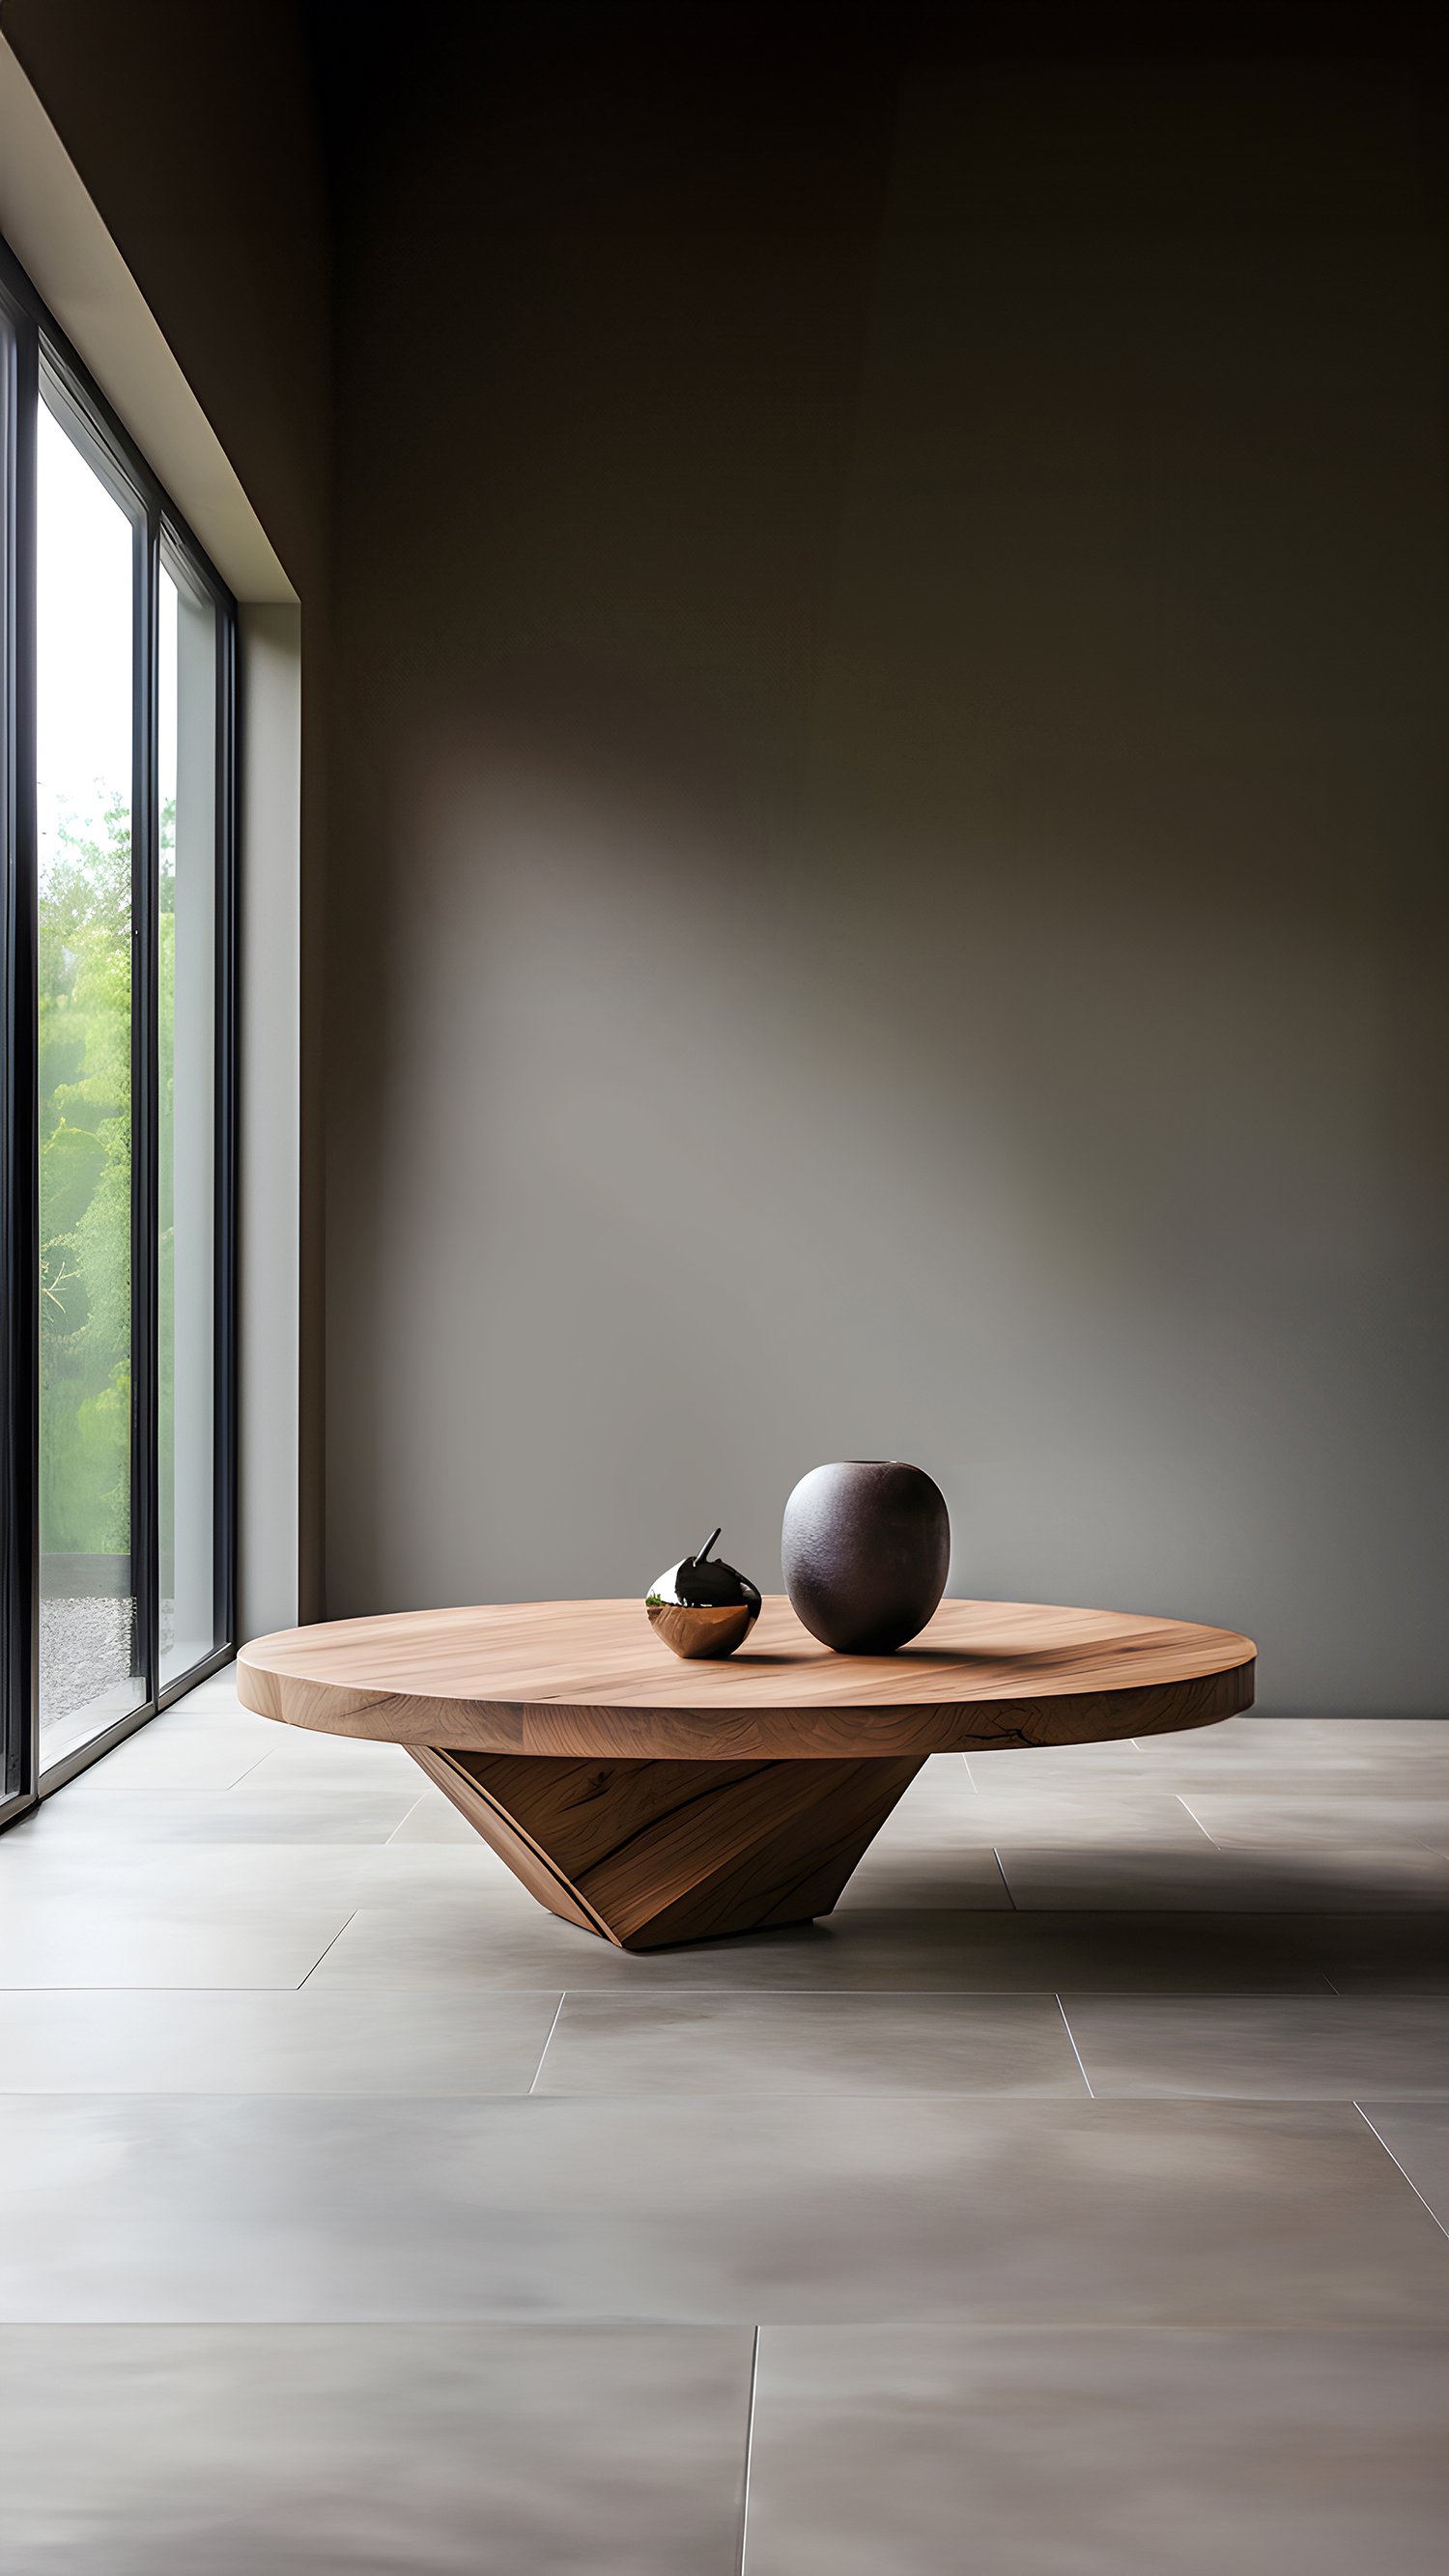 Sculptural Coffee Table Made of Solid Wood, Center Table Solace S27 by Joel Escalona — 7.jpg